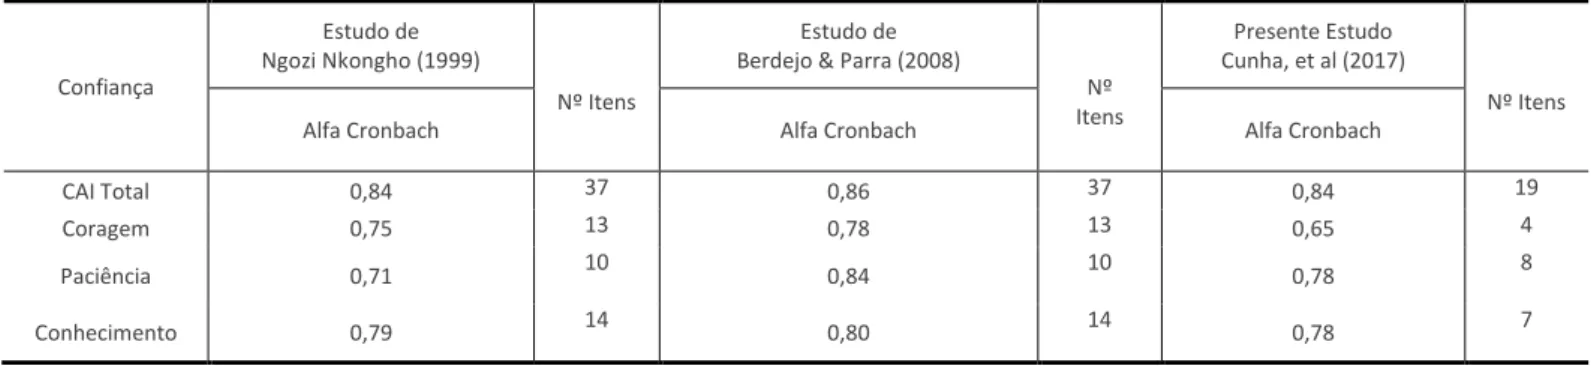 Table 6 - Reliability comparison between the English version and the Spanish version of the Caregiver Skills Inventory with the present study 